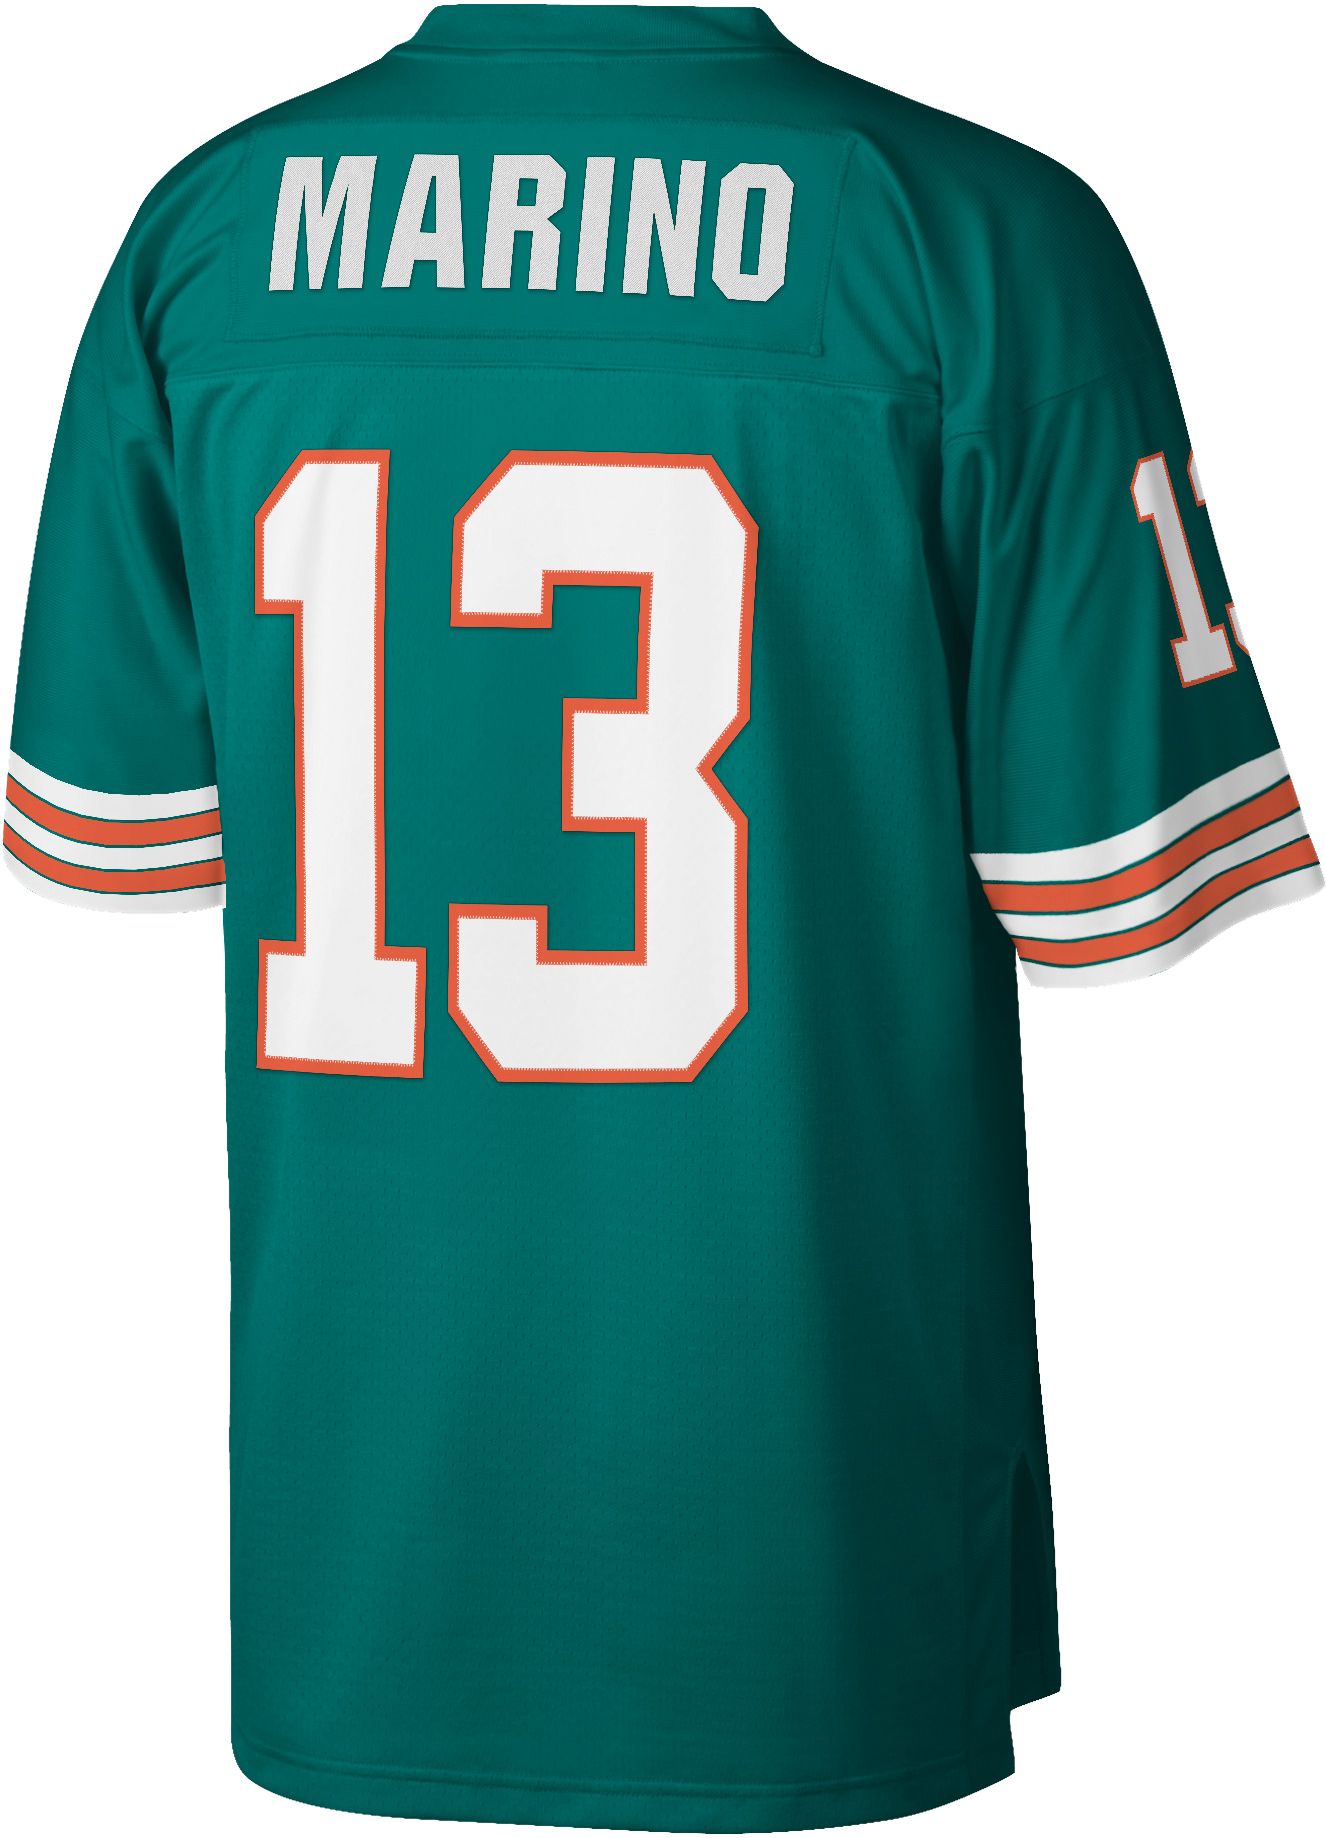 Dolphins jersey number 13